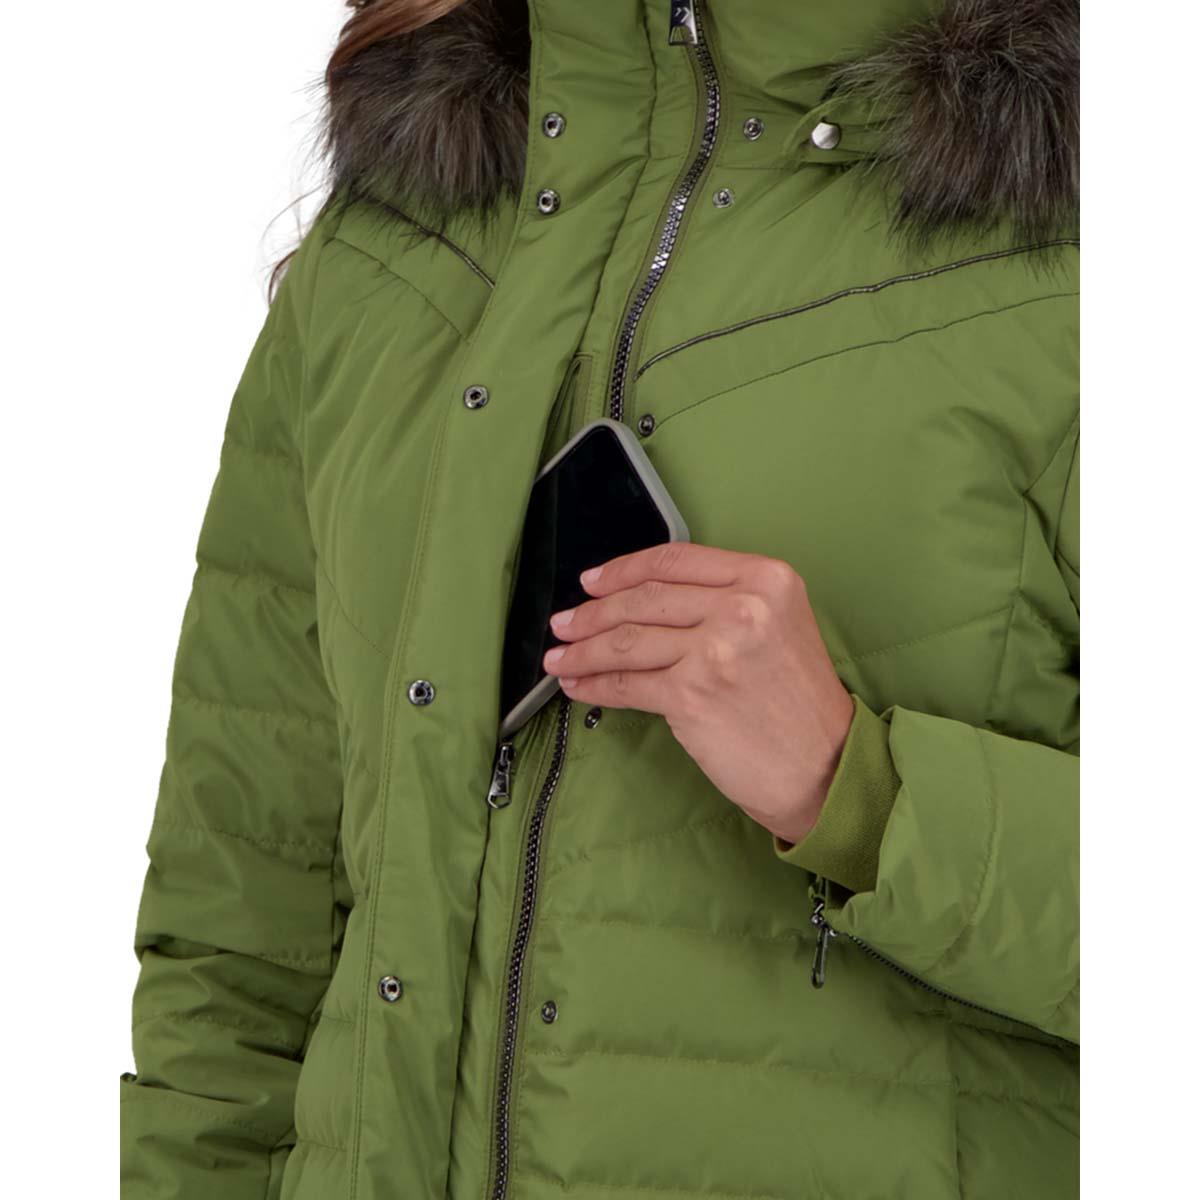 WOMEN'S BLOSSOM DOWN PARKA WITH FAUX FUR - Saguaro Green